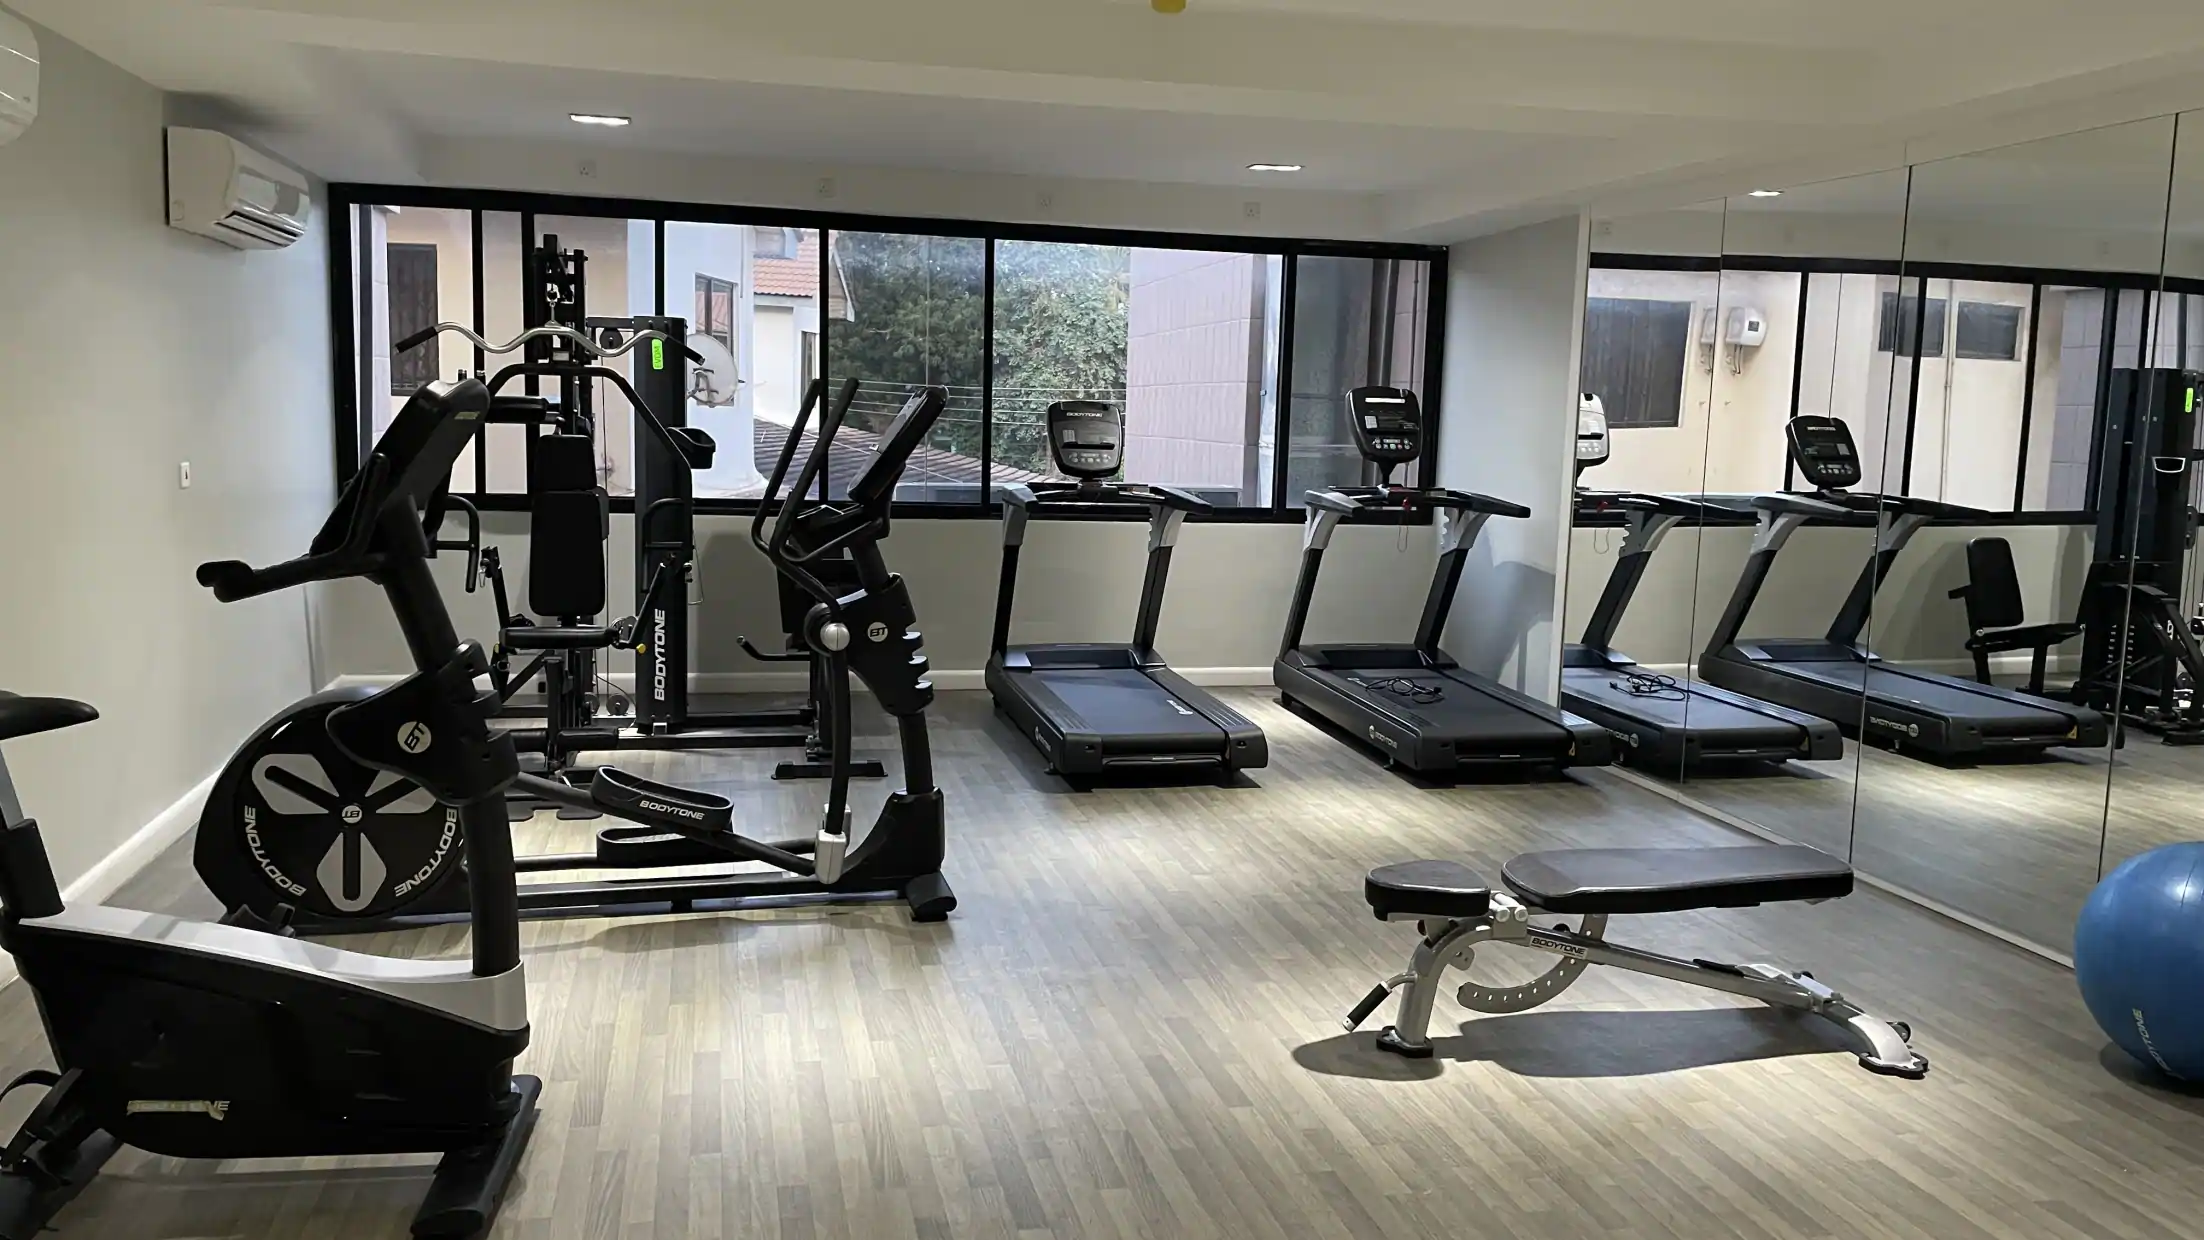 things to do at central hotel ridge Fitness & wellness studio